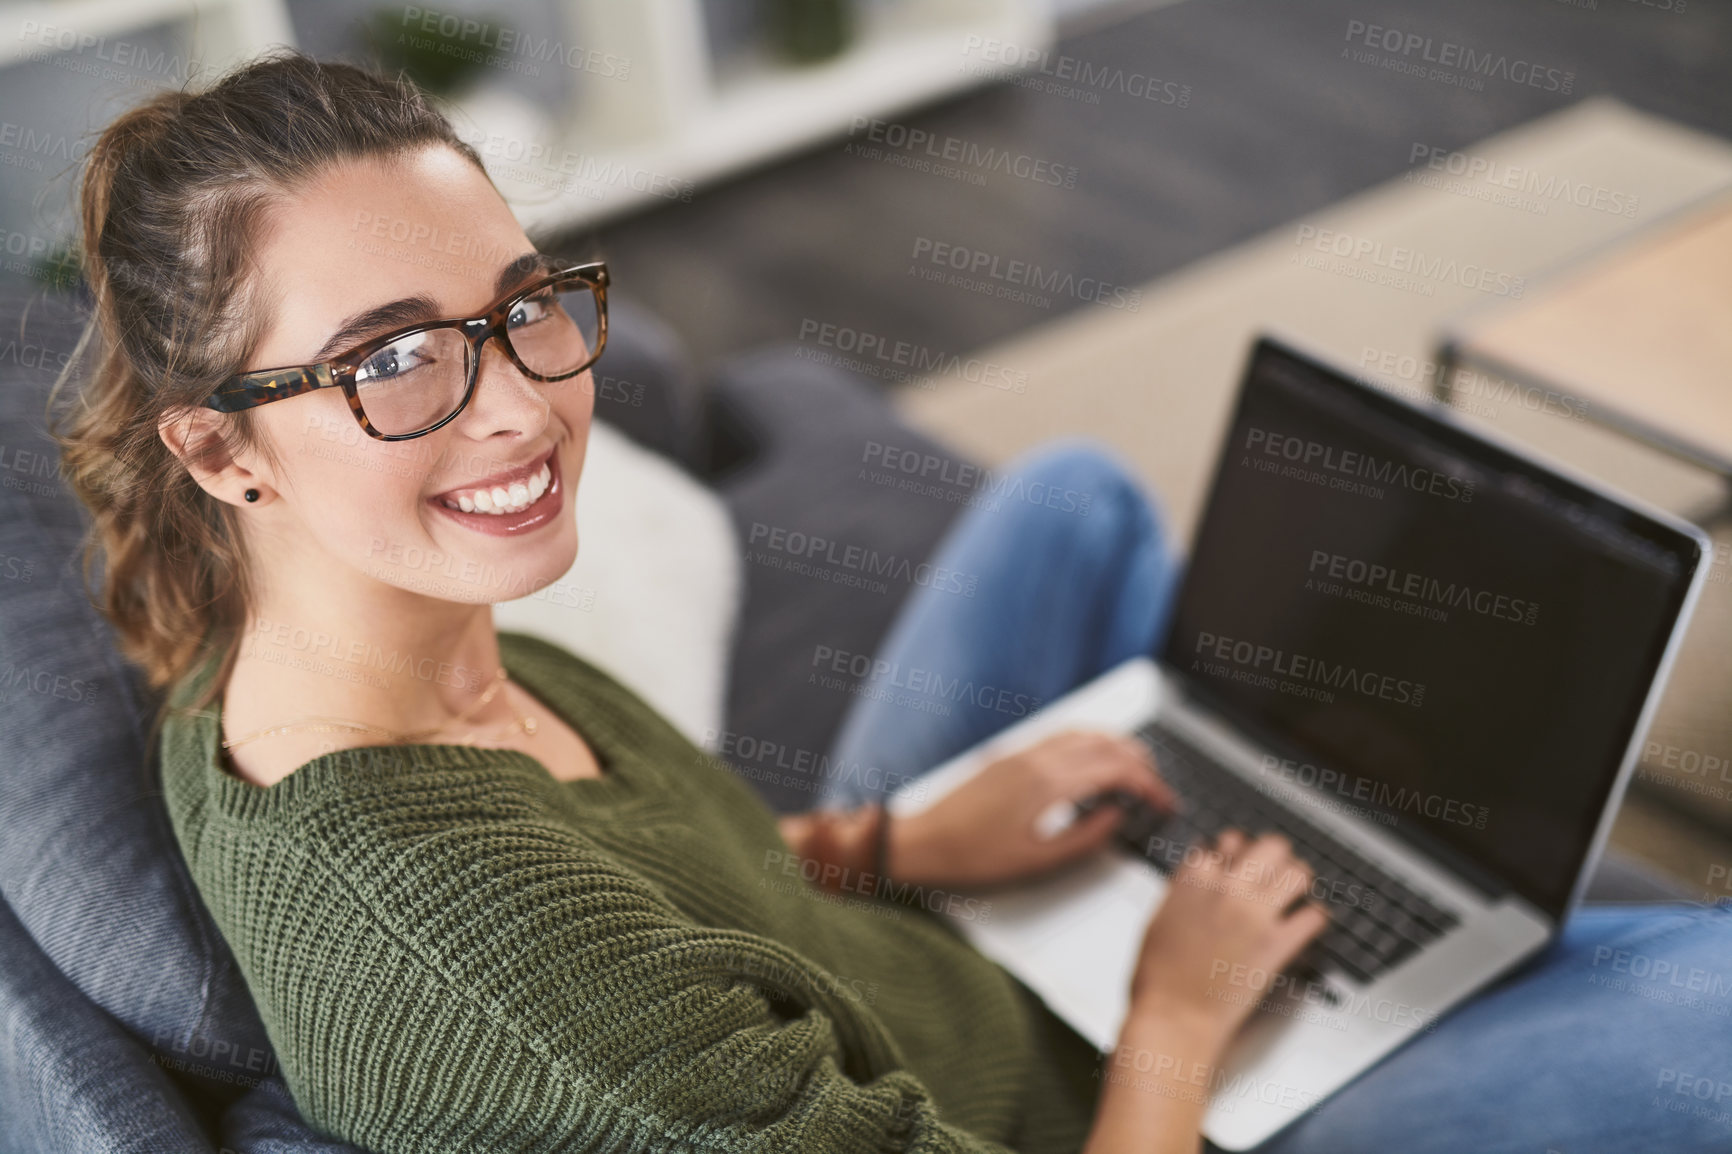 Buy stock photo Portrait of a beautiful young woman using her laptop while relaxing on a couch at home